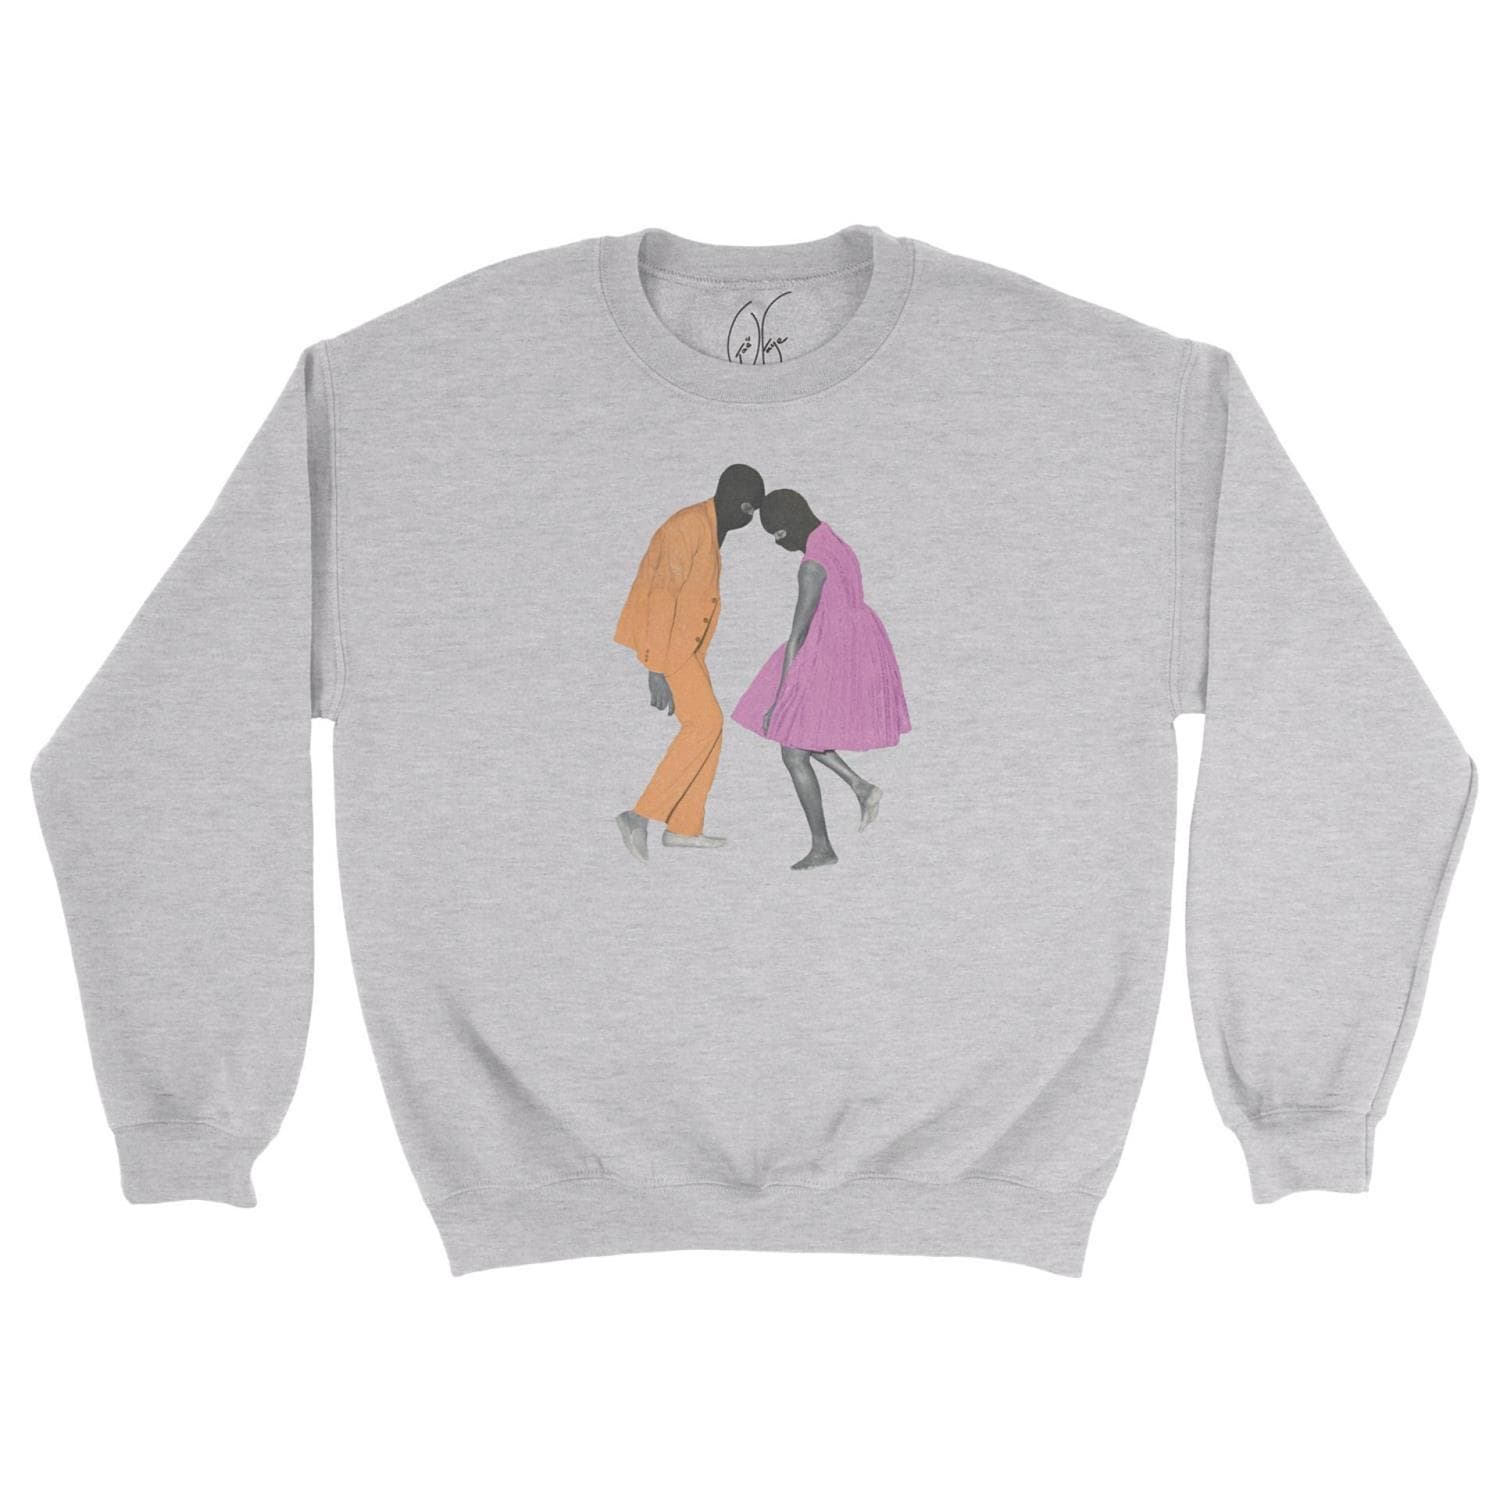 SWEAT COL ROND - COUPLE